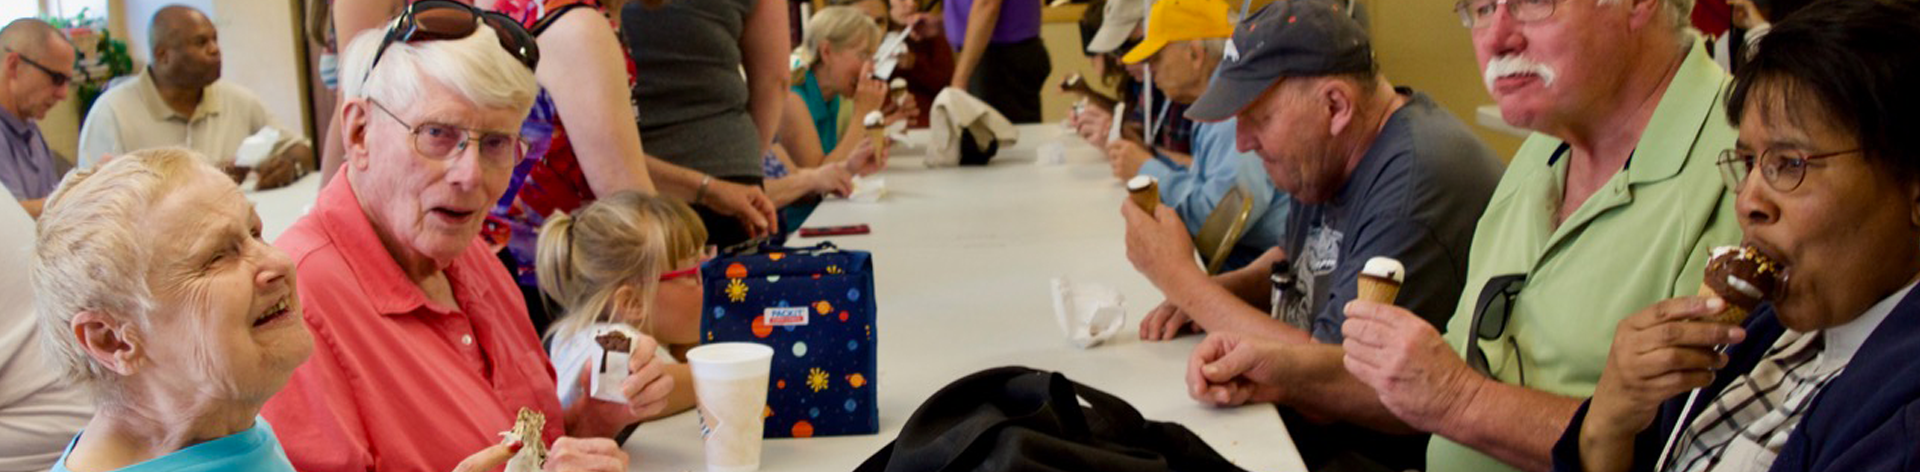 A group of blind and sighted seniors enjoy ice cream together at a gathering.